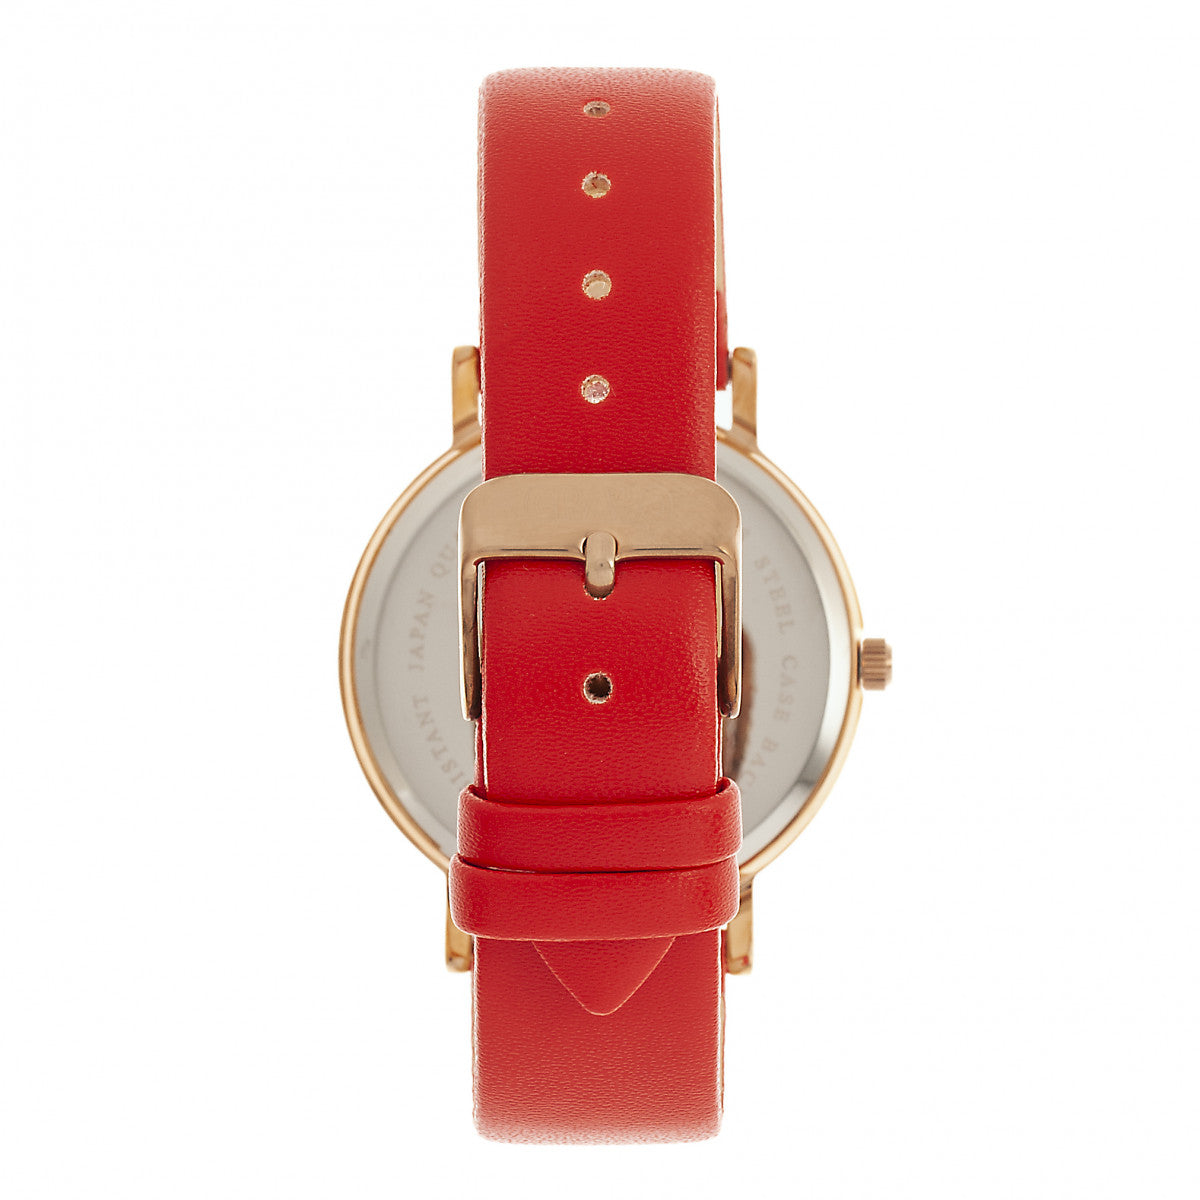 Crayo Fortune Unisex Watch - Rose Gold/Red - CRACR4305